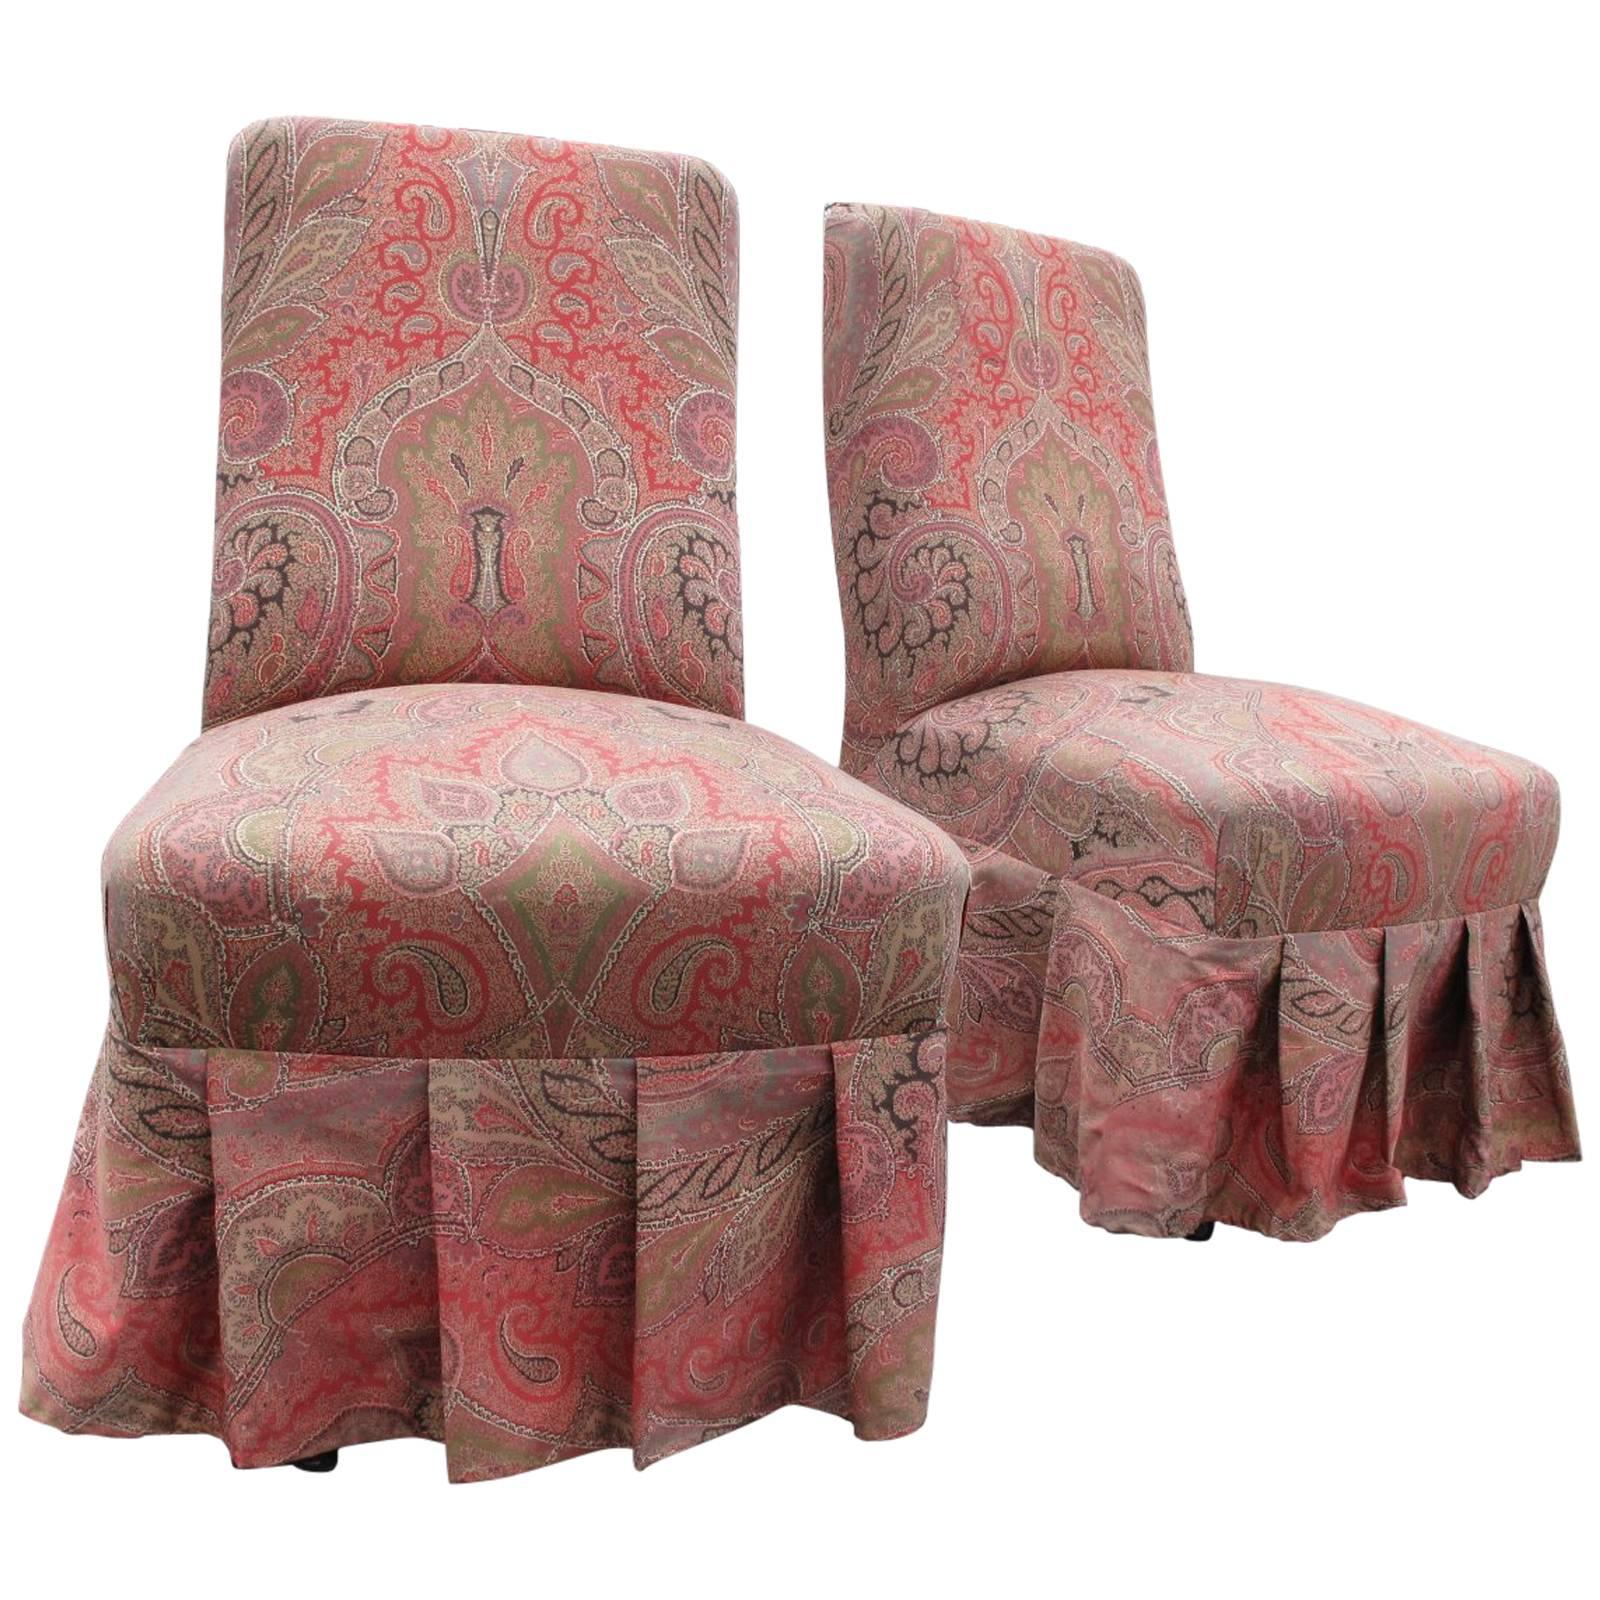 Pair of 19th Century French Paisley Chairs